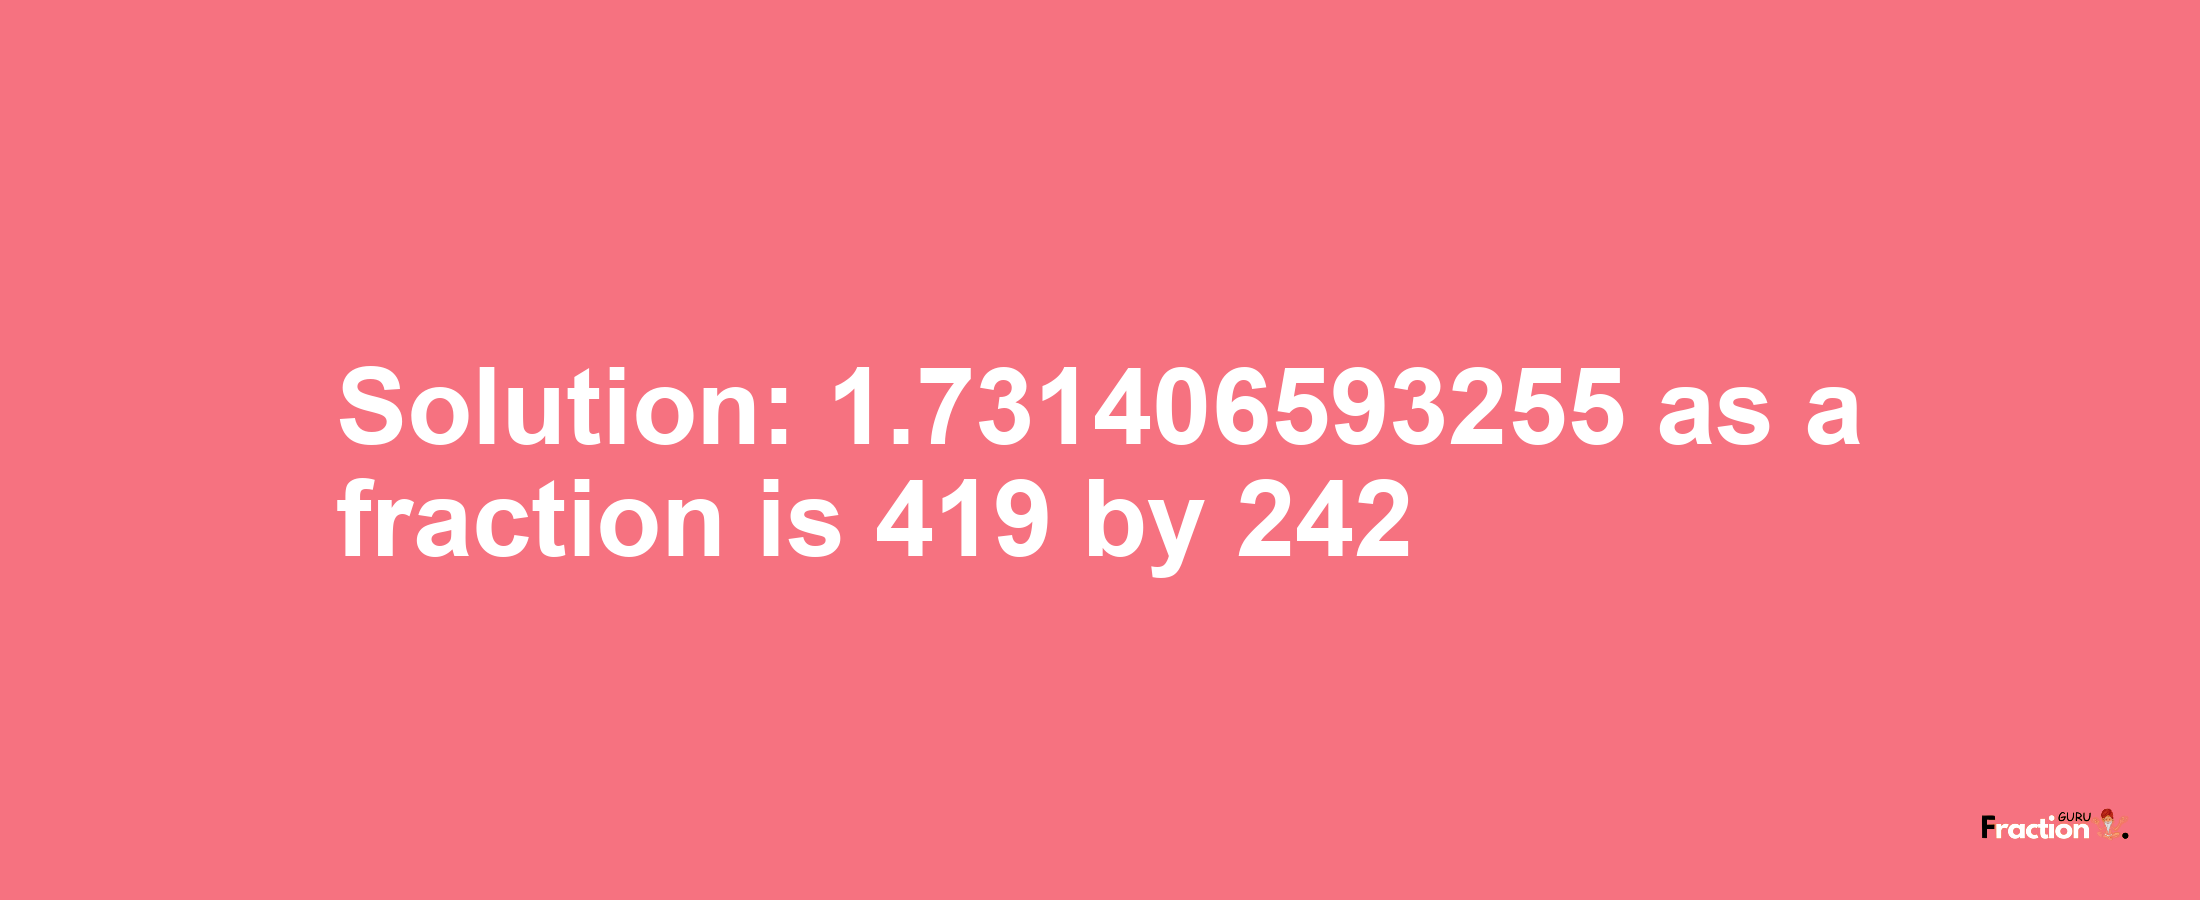 Solution:1.731406593255 as a fraction is 419/242